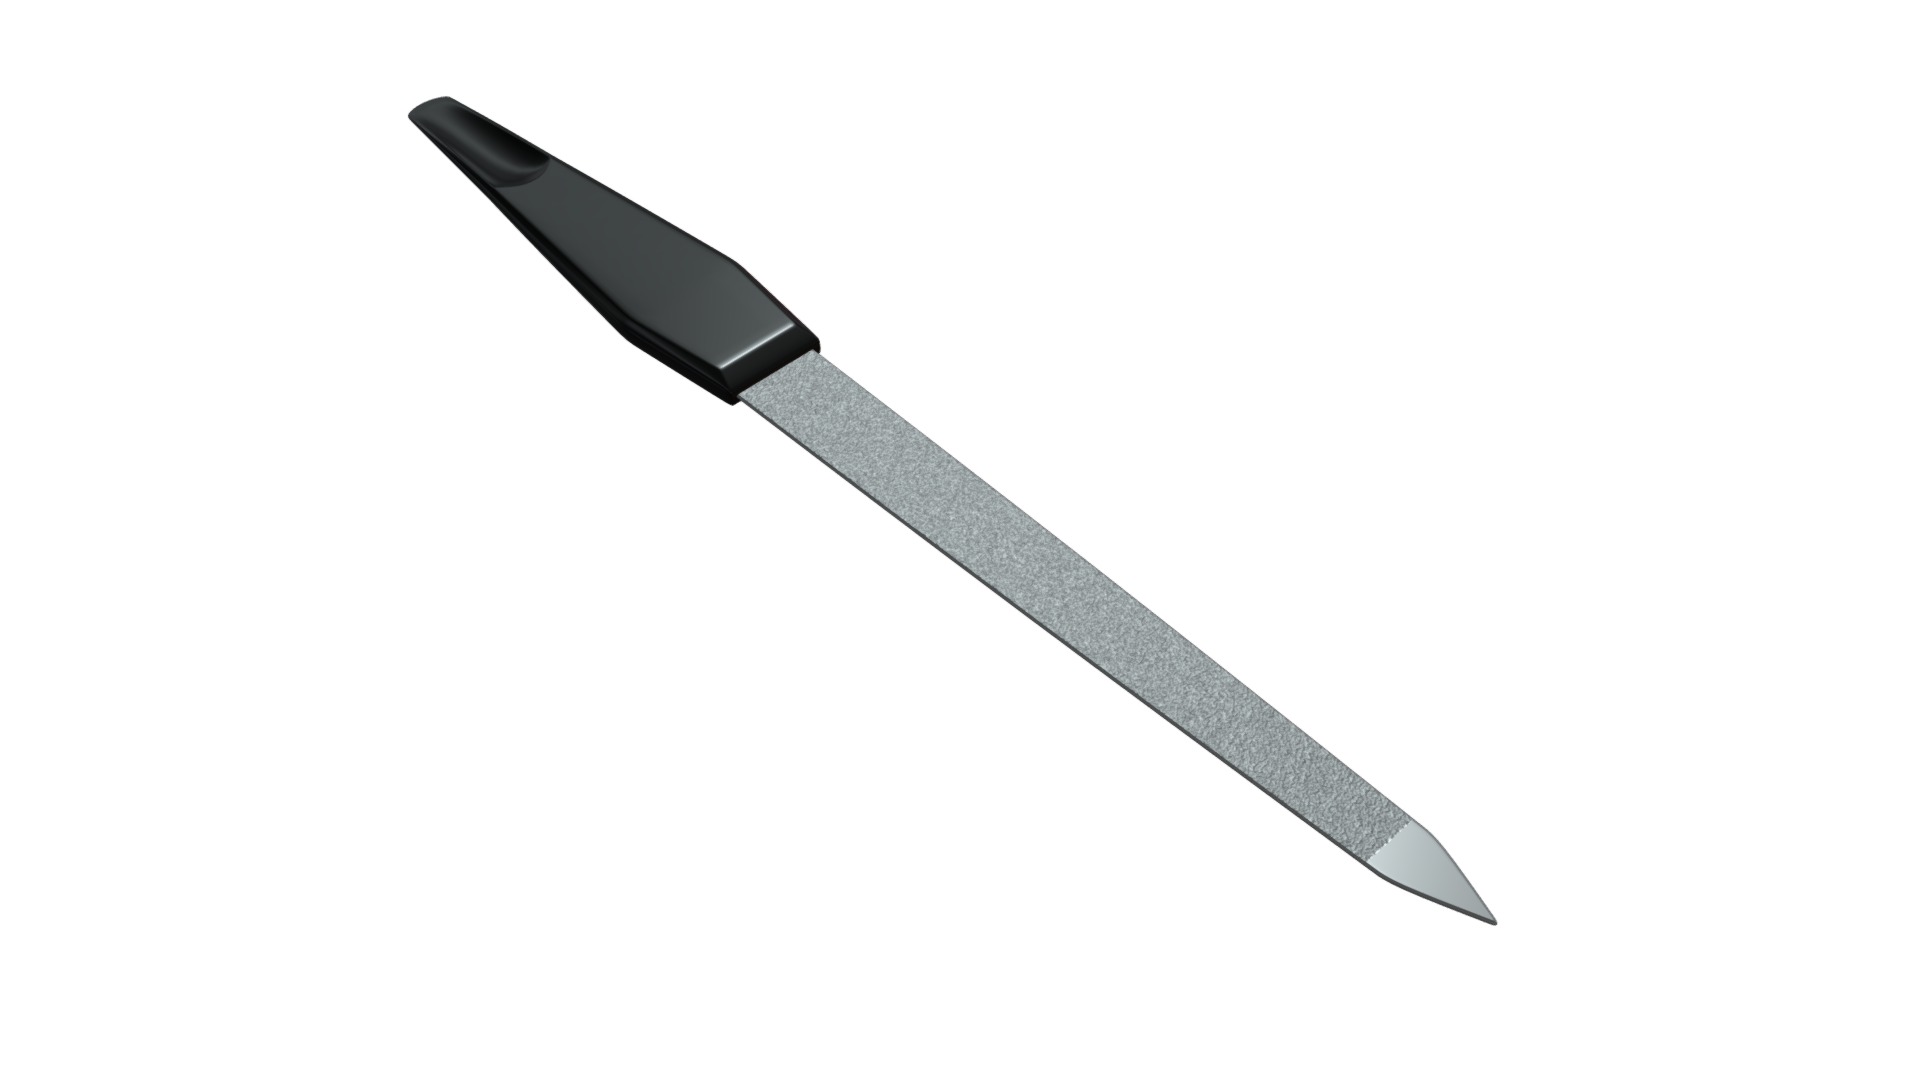 3D model Nail file - This is a 3D model of the Nail file. The 3D model is about a silver knife with a black handle.